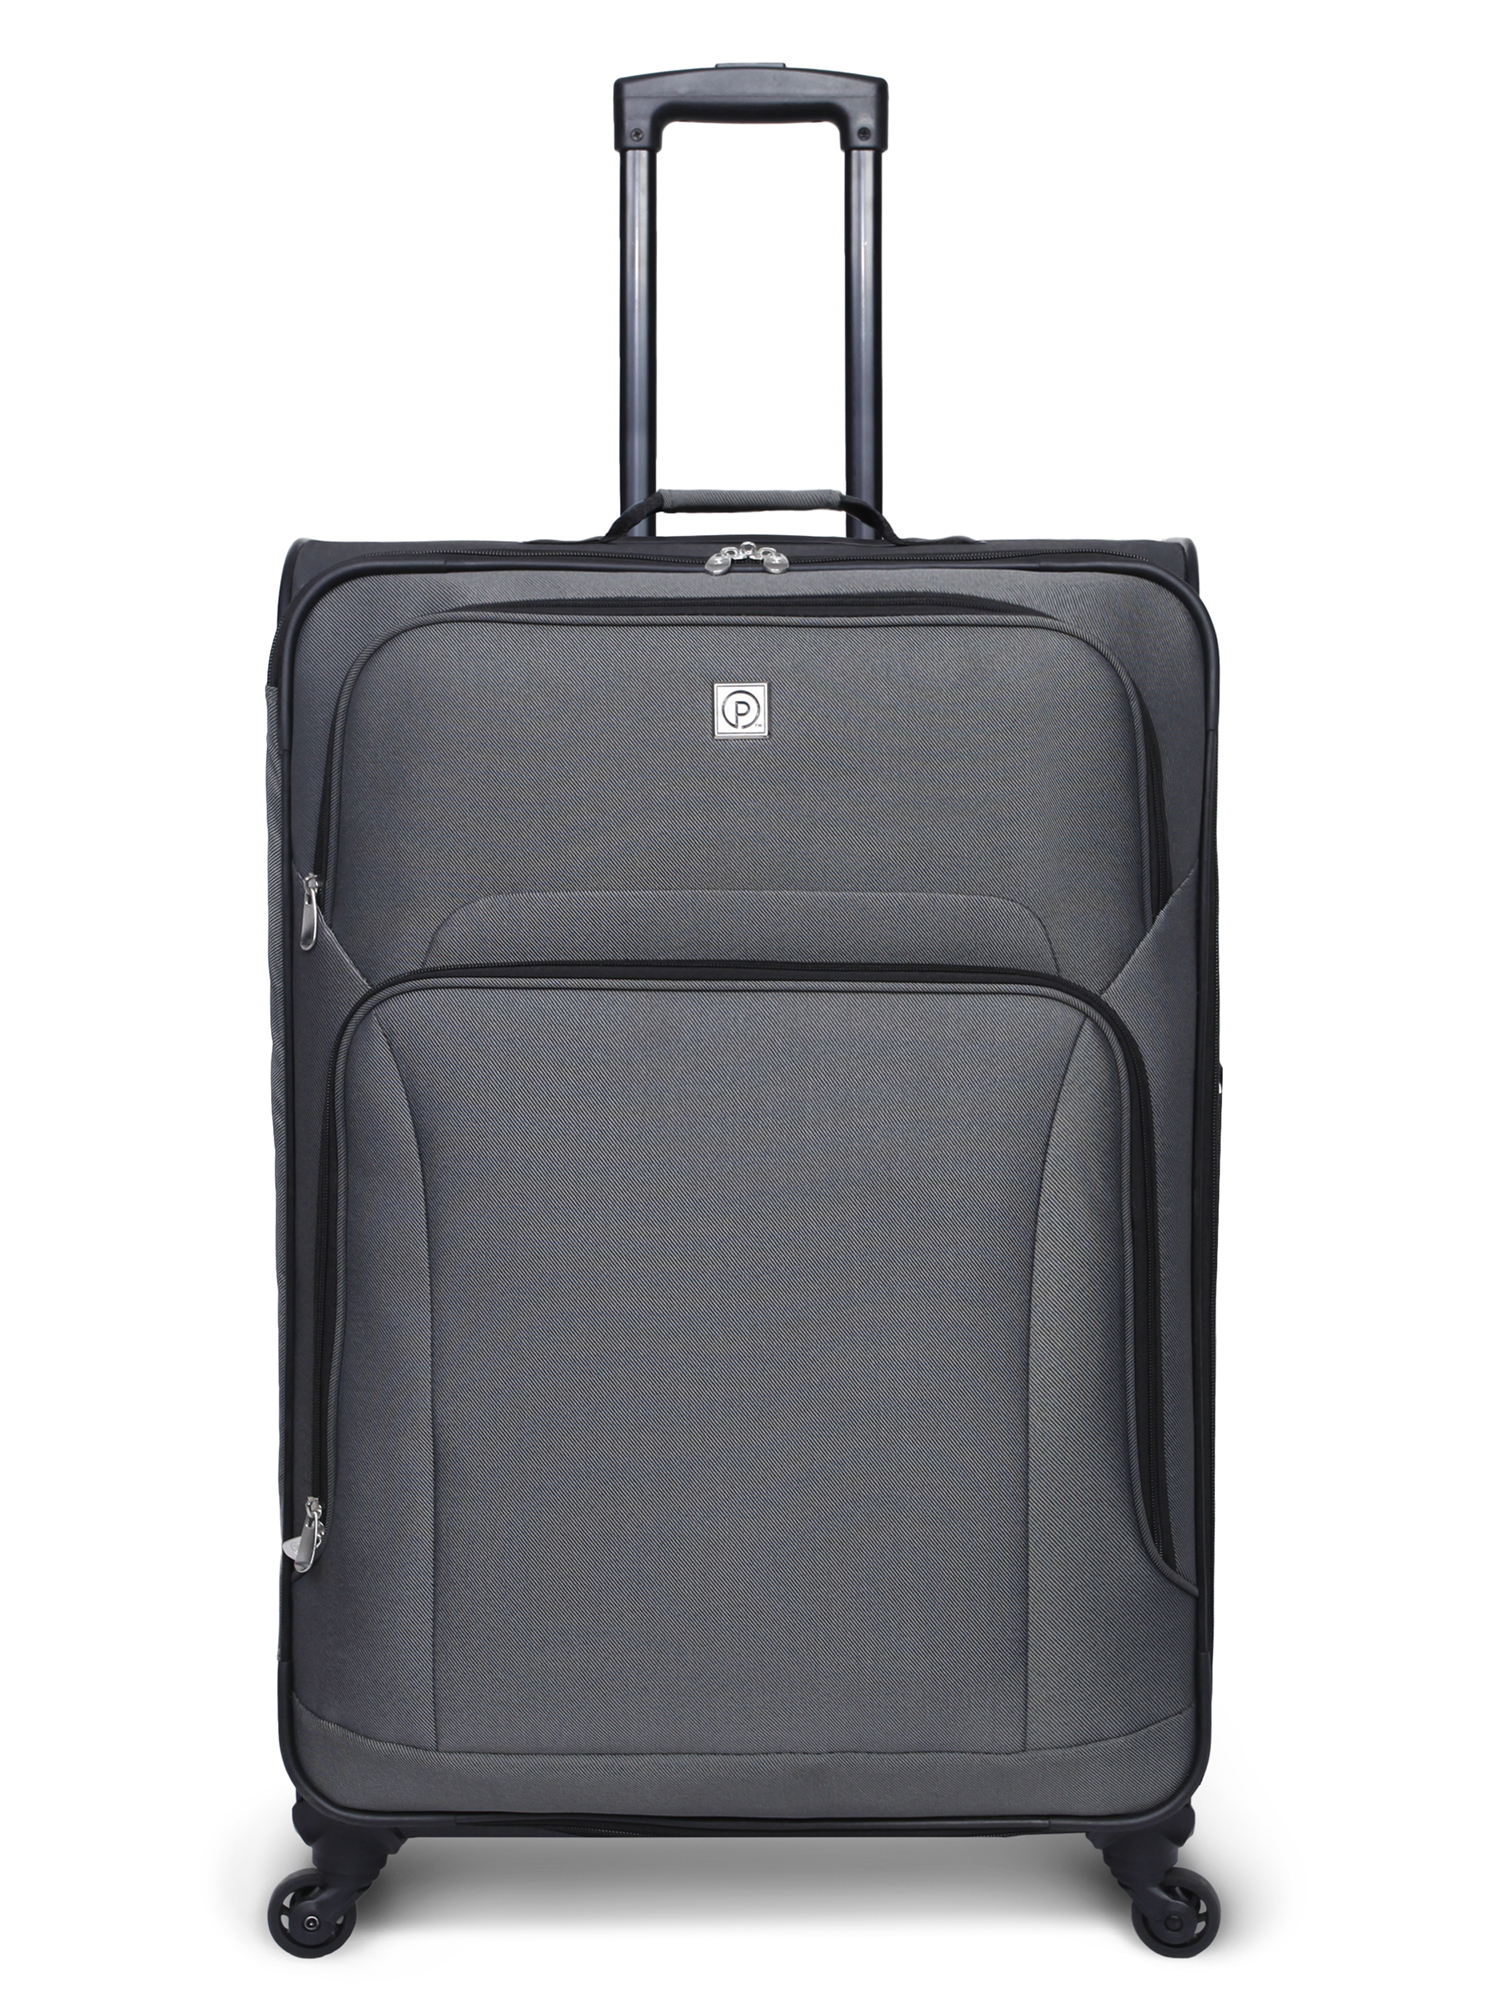 Protege 5 Pc Spinner Luggage Set With 28" & 24" Check Bags, 20" Carry-on, Gray - image 3 of 12